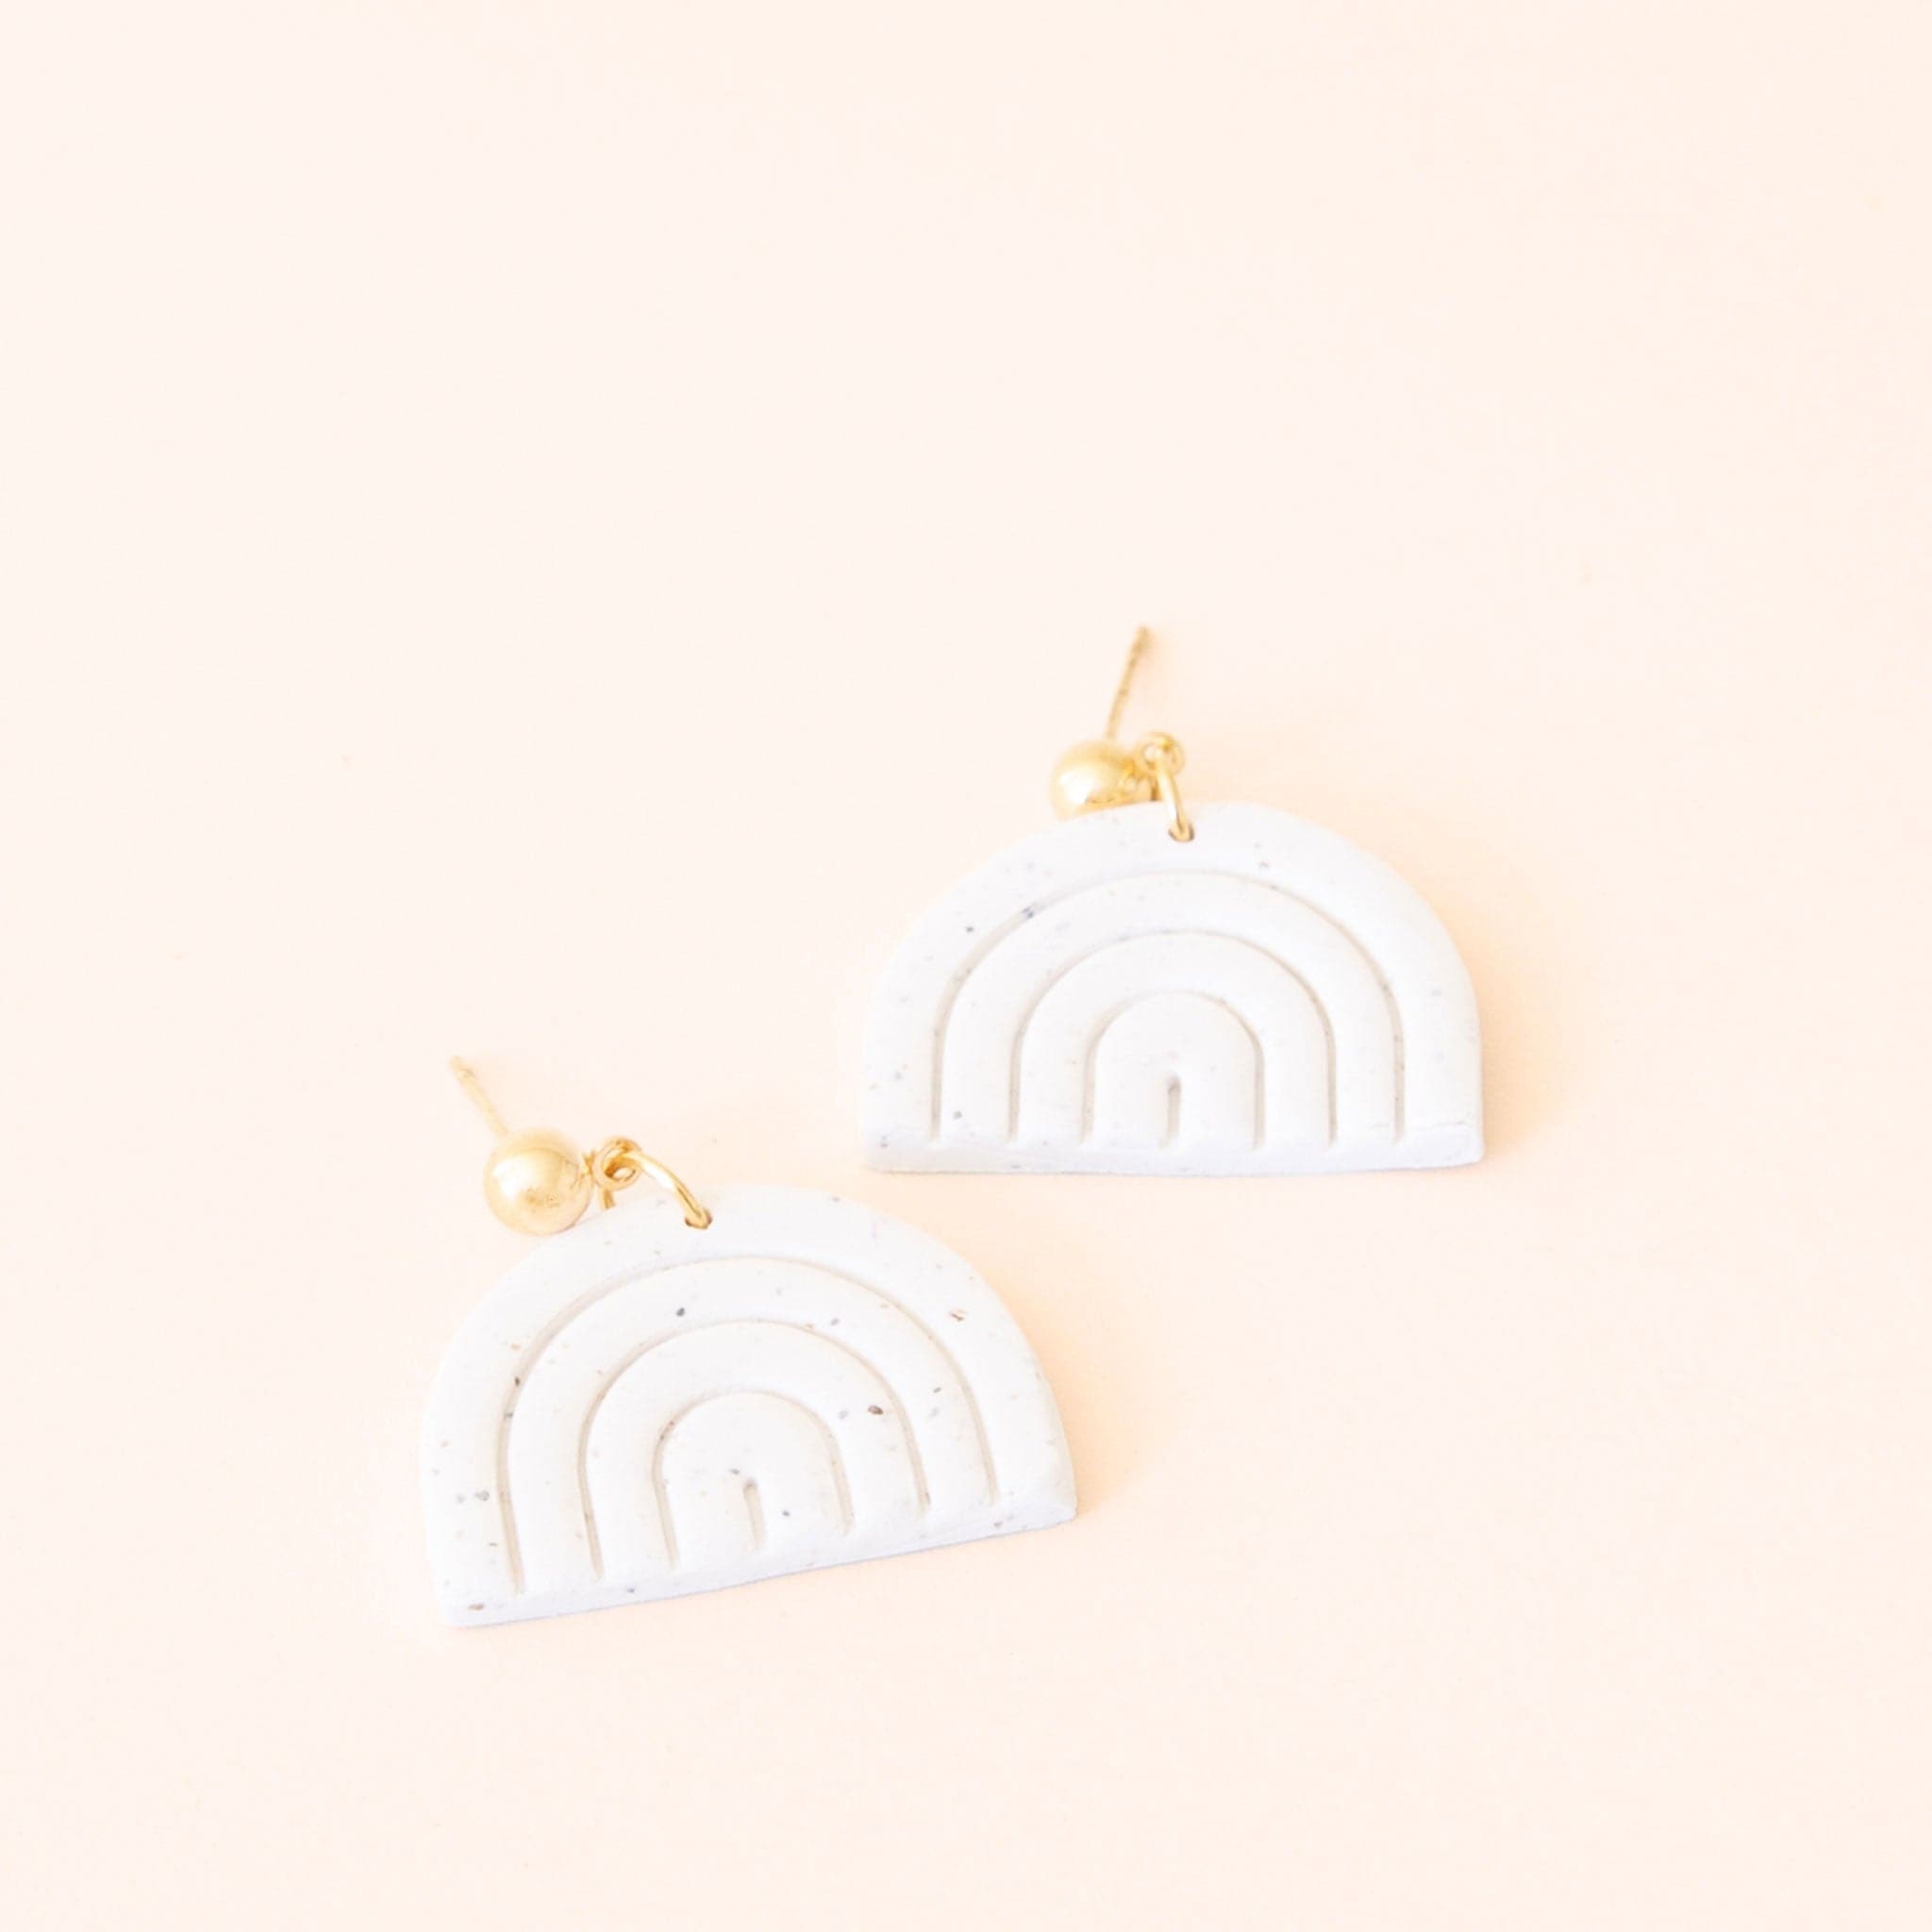 Pair of earrings made of two clay white rainbows. Each earring is attached to the post with a small gold hoop. 